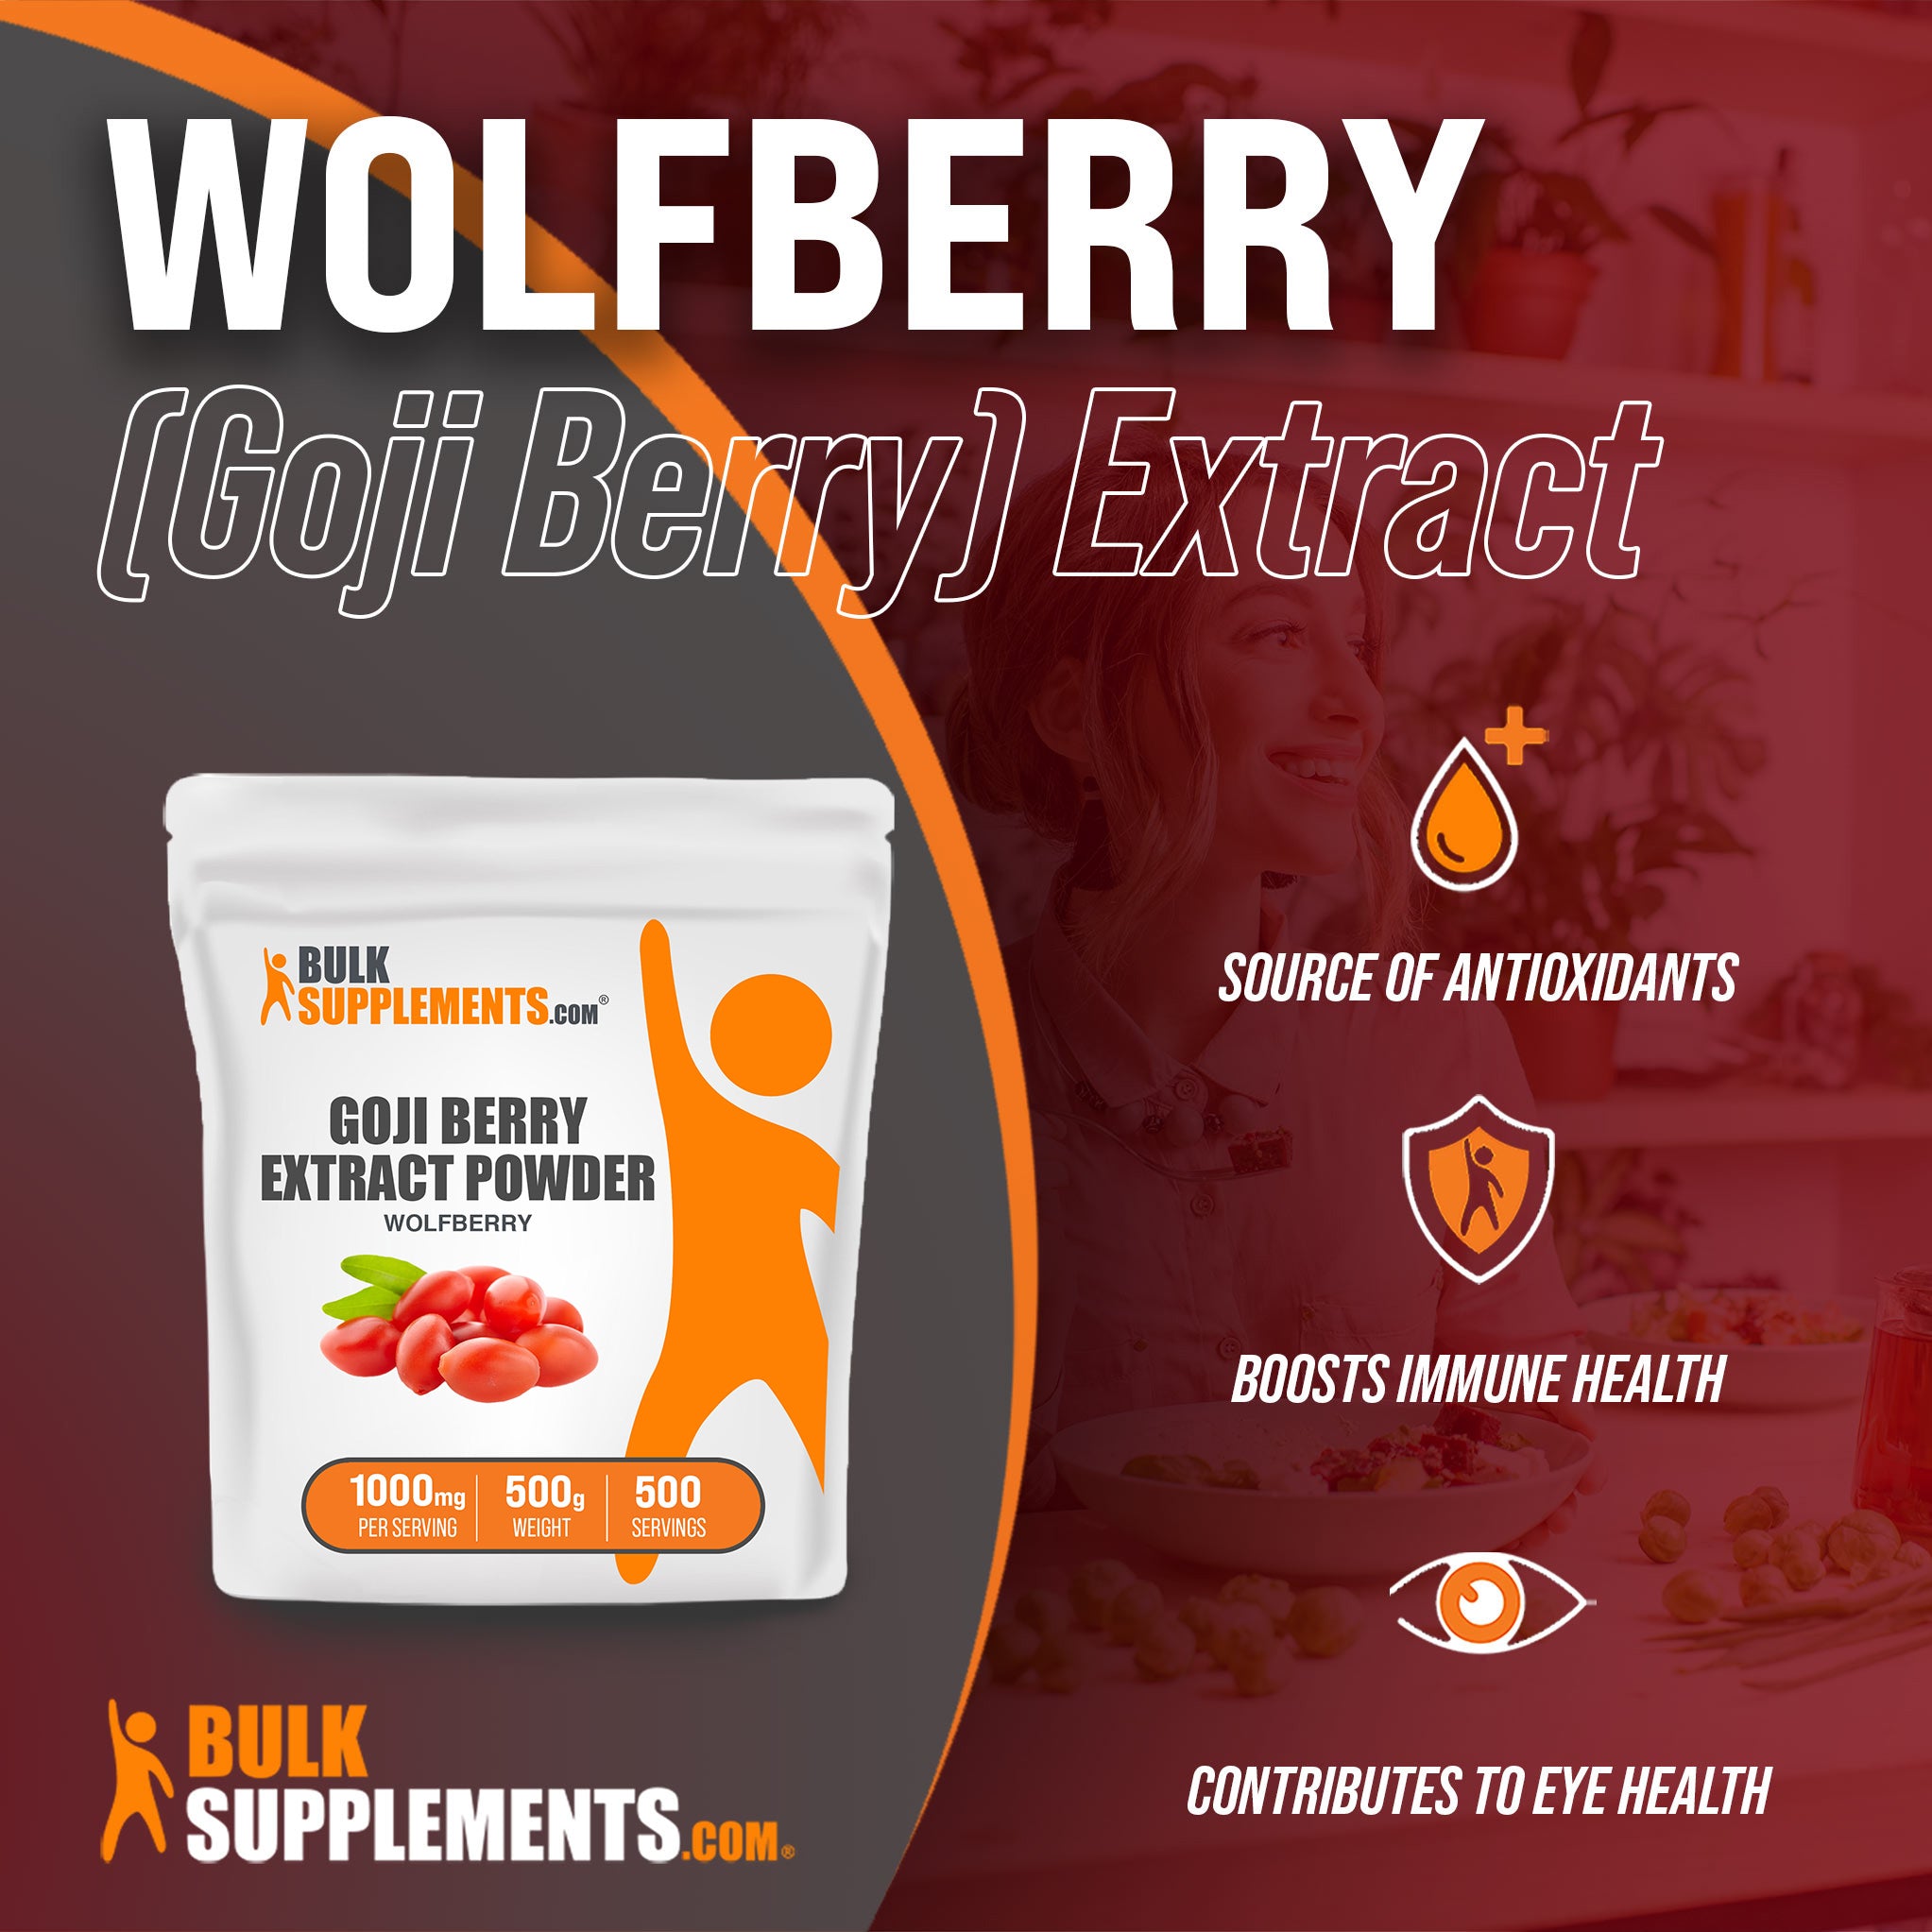 Benefits of Wolfberry Goji Berry Extract: source of antioxidants, boosts immune health, contributes to eye health